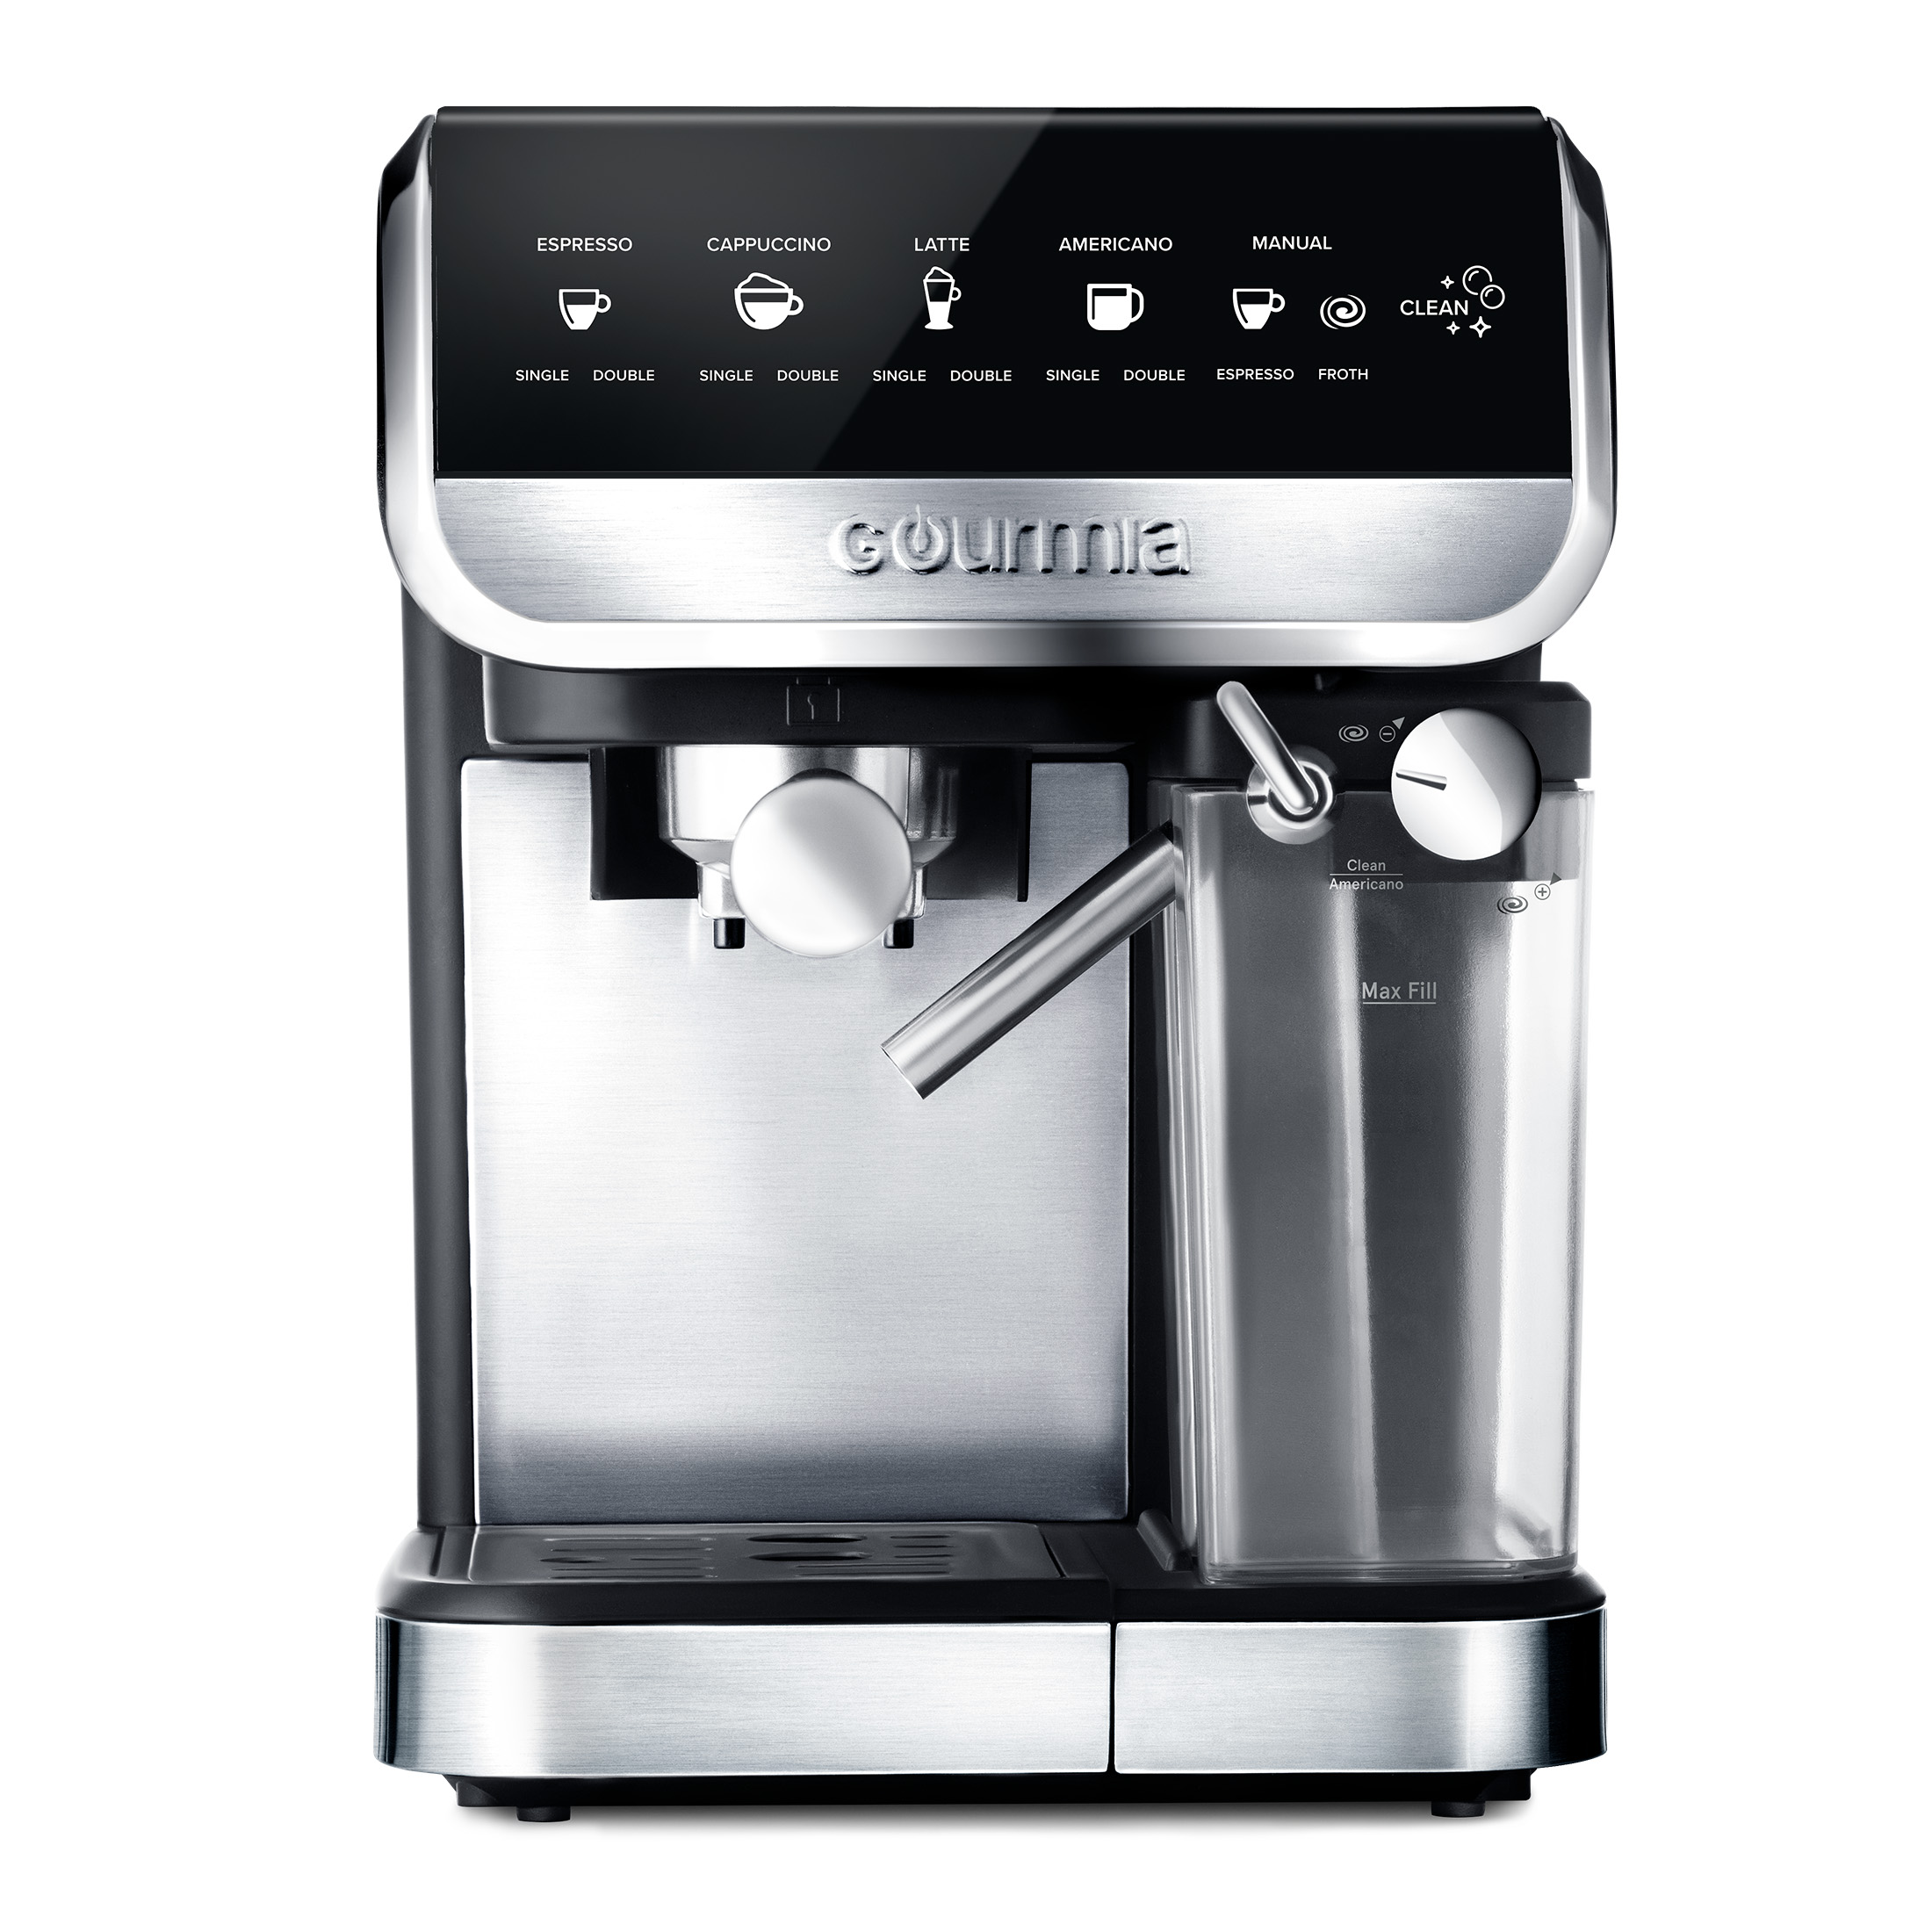 Gourmia Espresso, Cappuccino, Latte & Americano Maker with Automatic Frothing - image 1 of 9